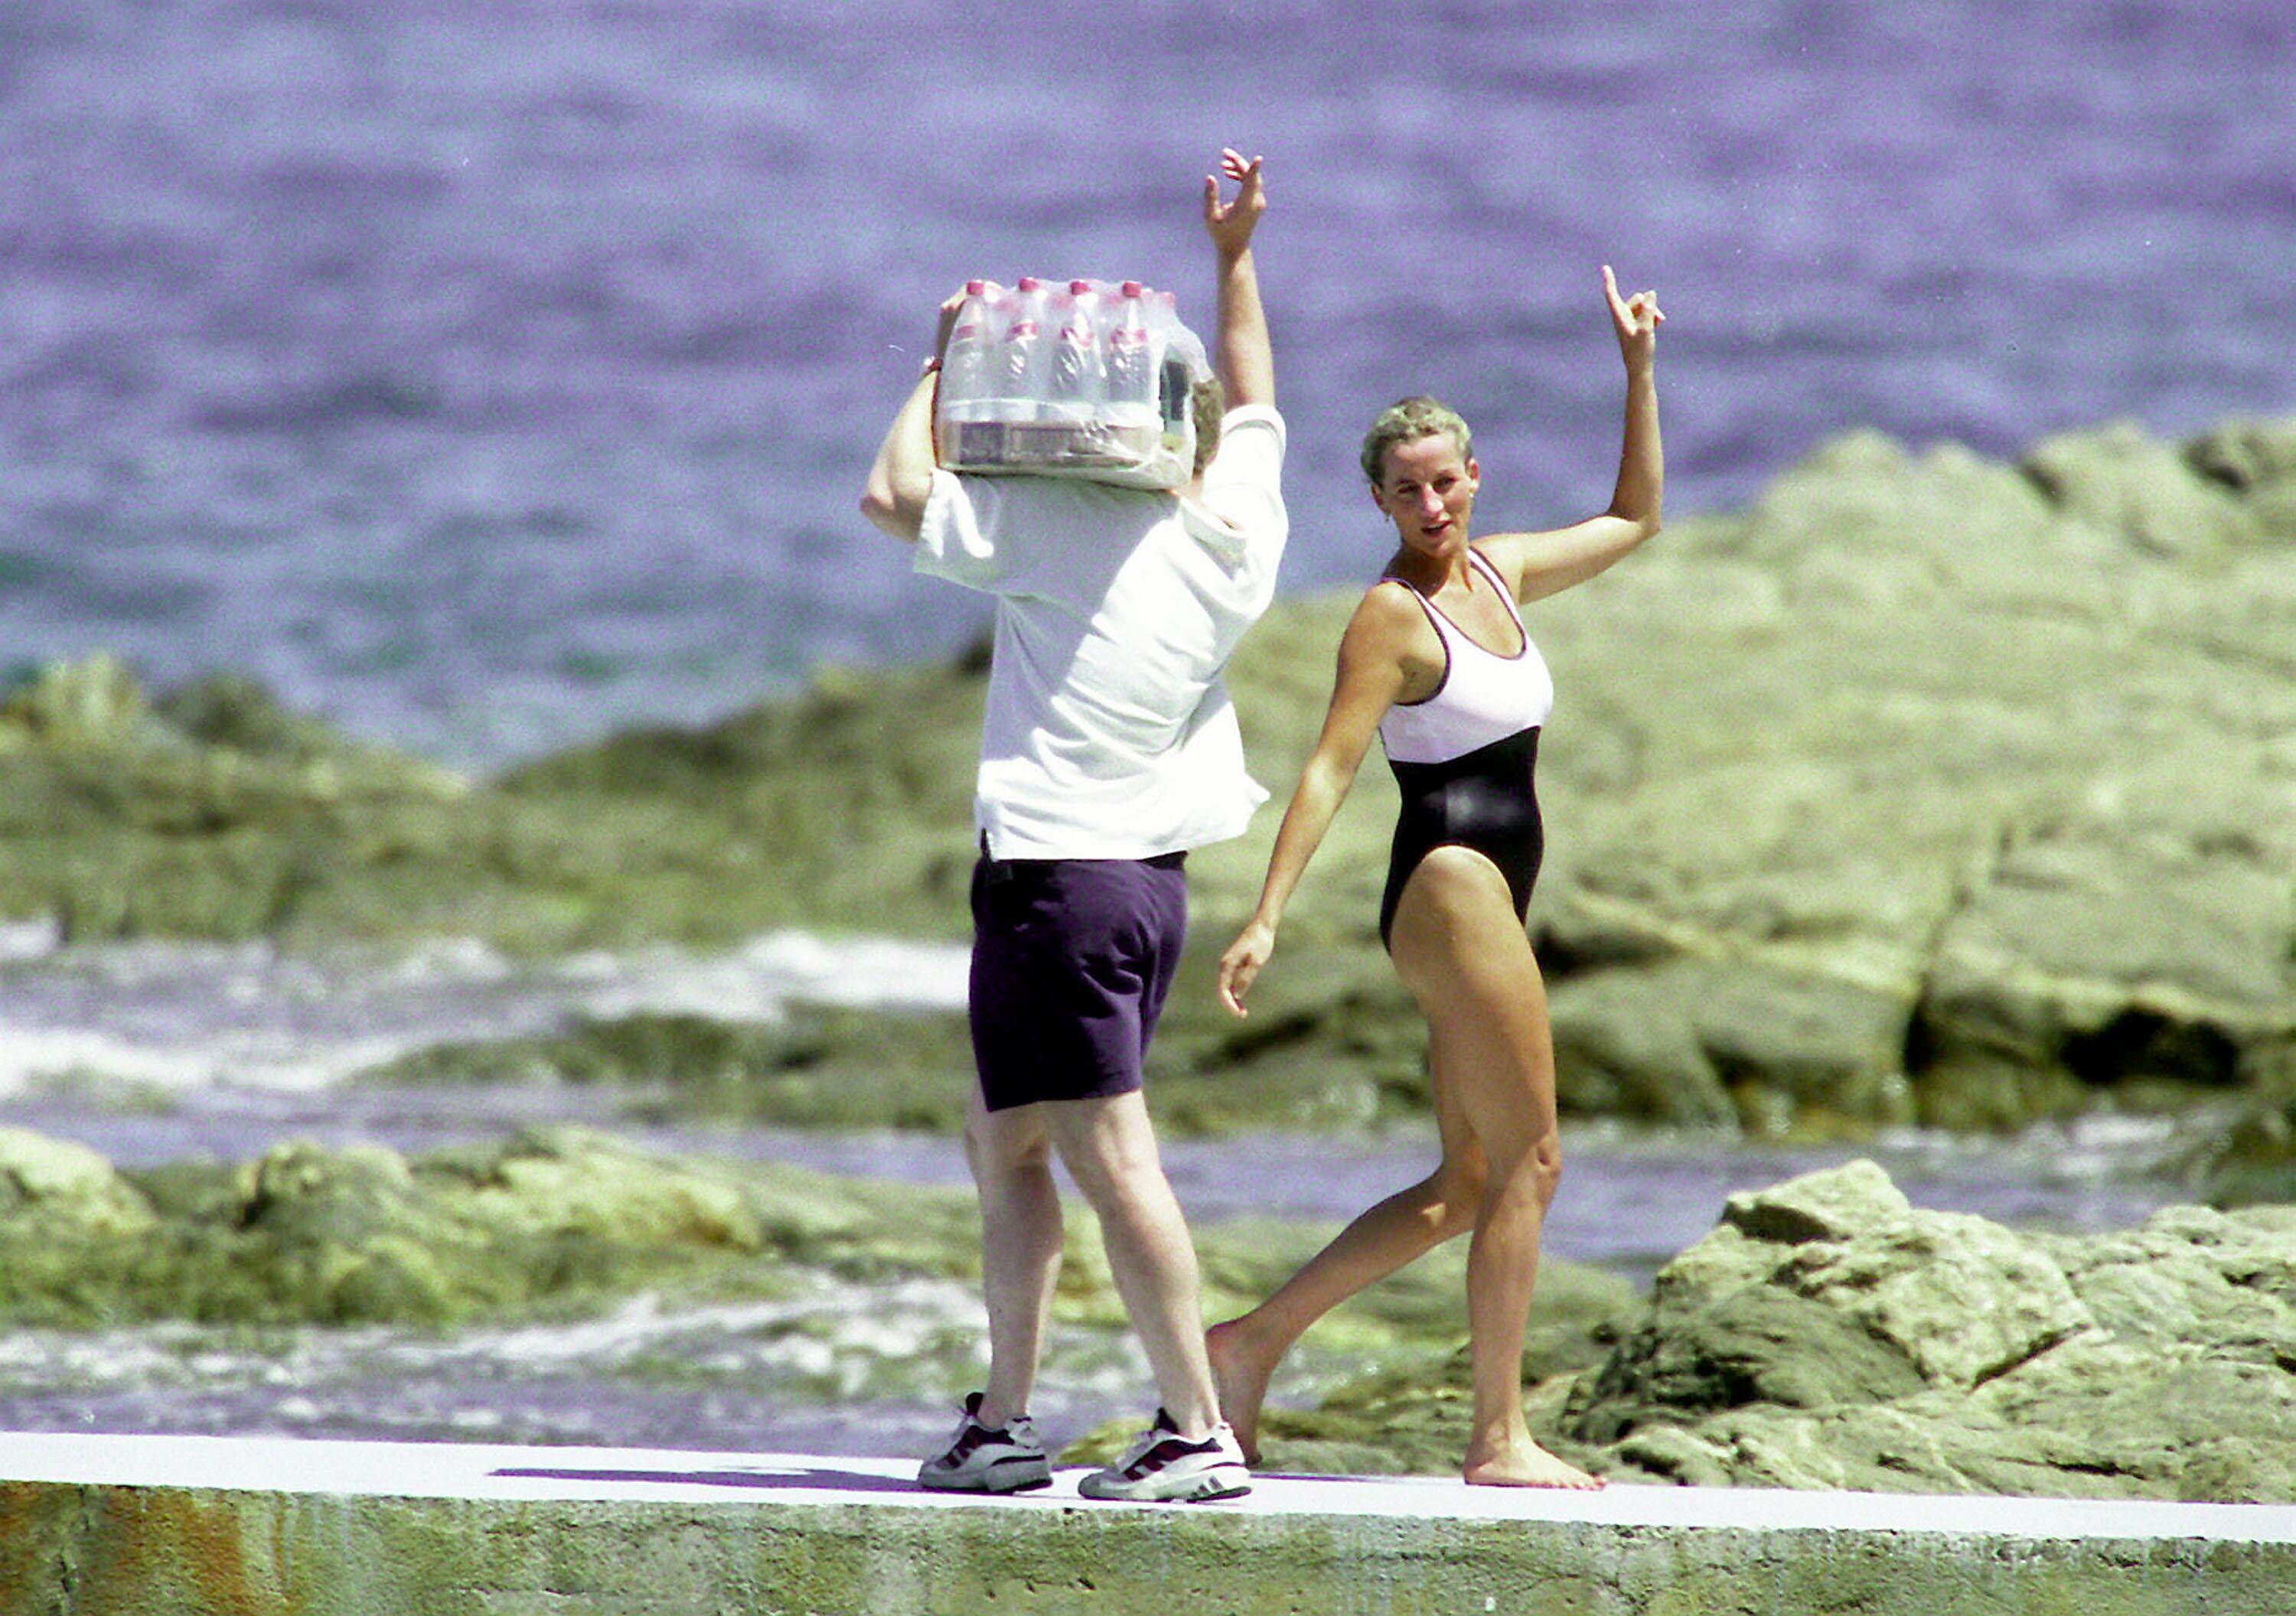 Diana, Princess of Wales during a vacation in July 1997 in Saint Tropez, French Riviera | Source: Getty Images